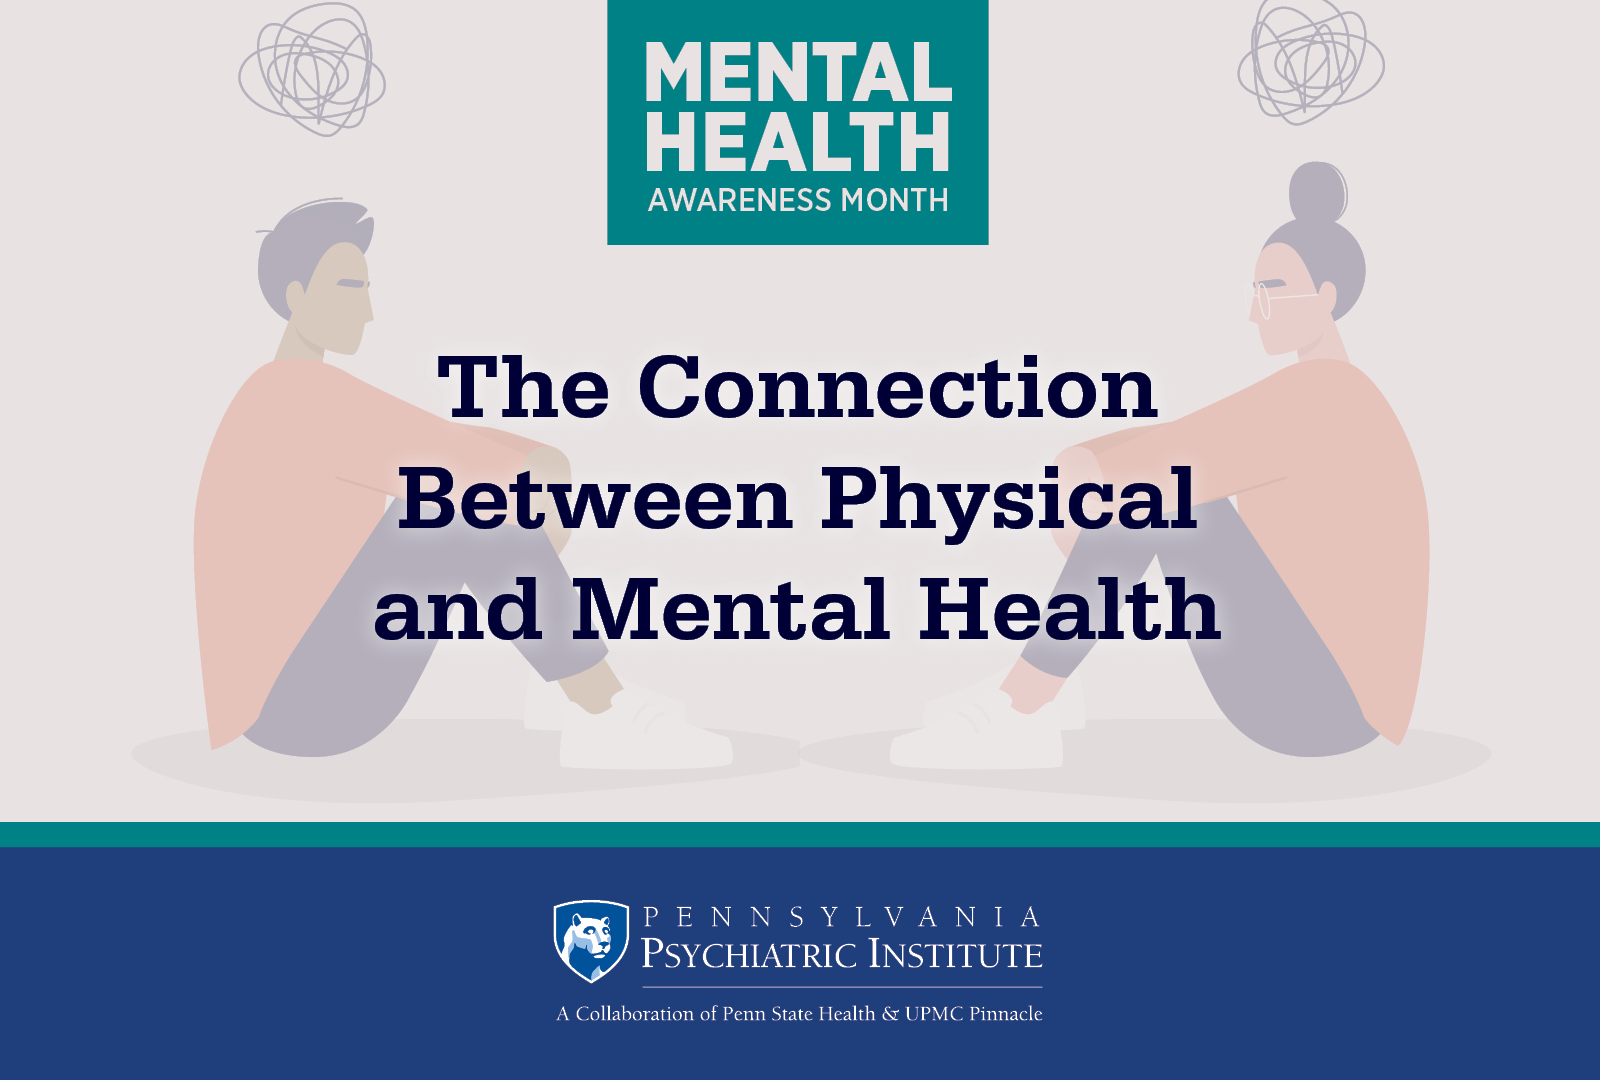 The Connection Between Physical and Mental Health